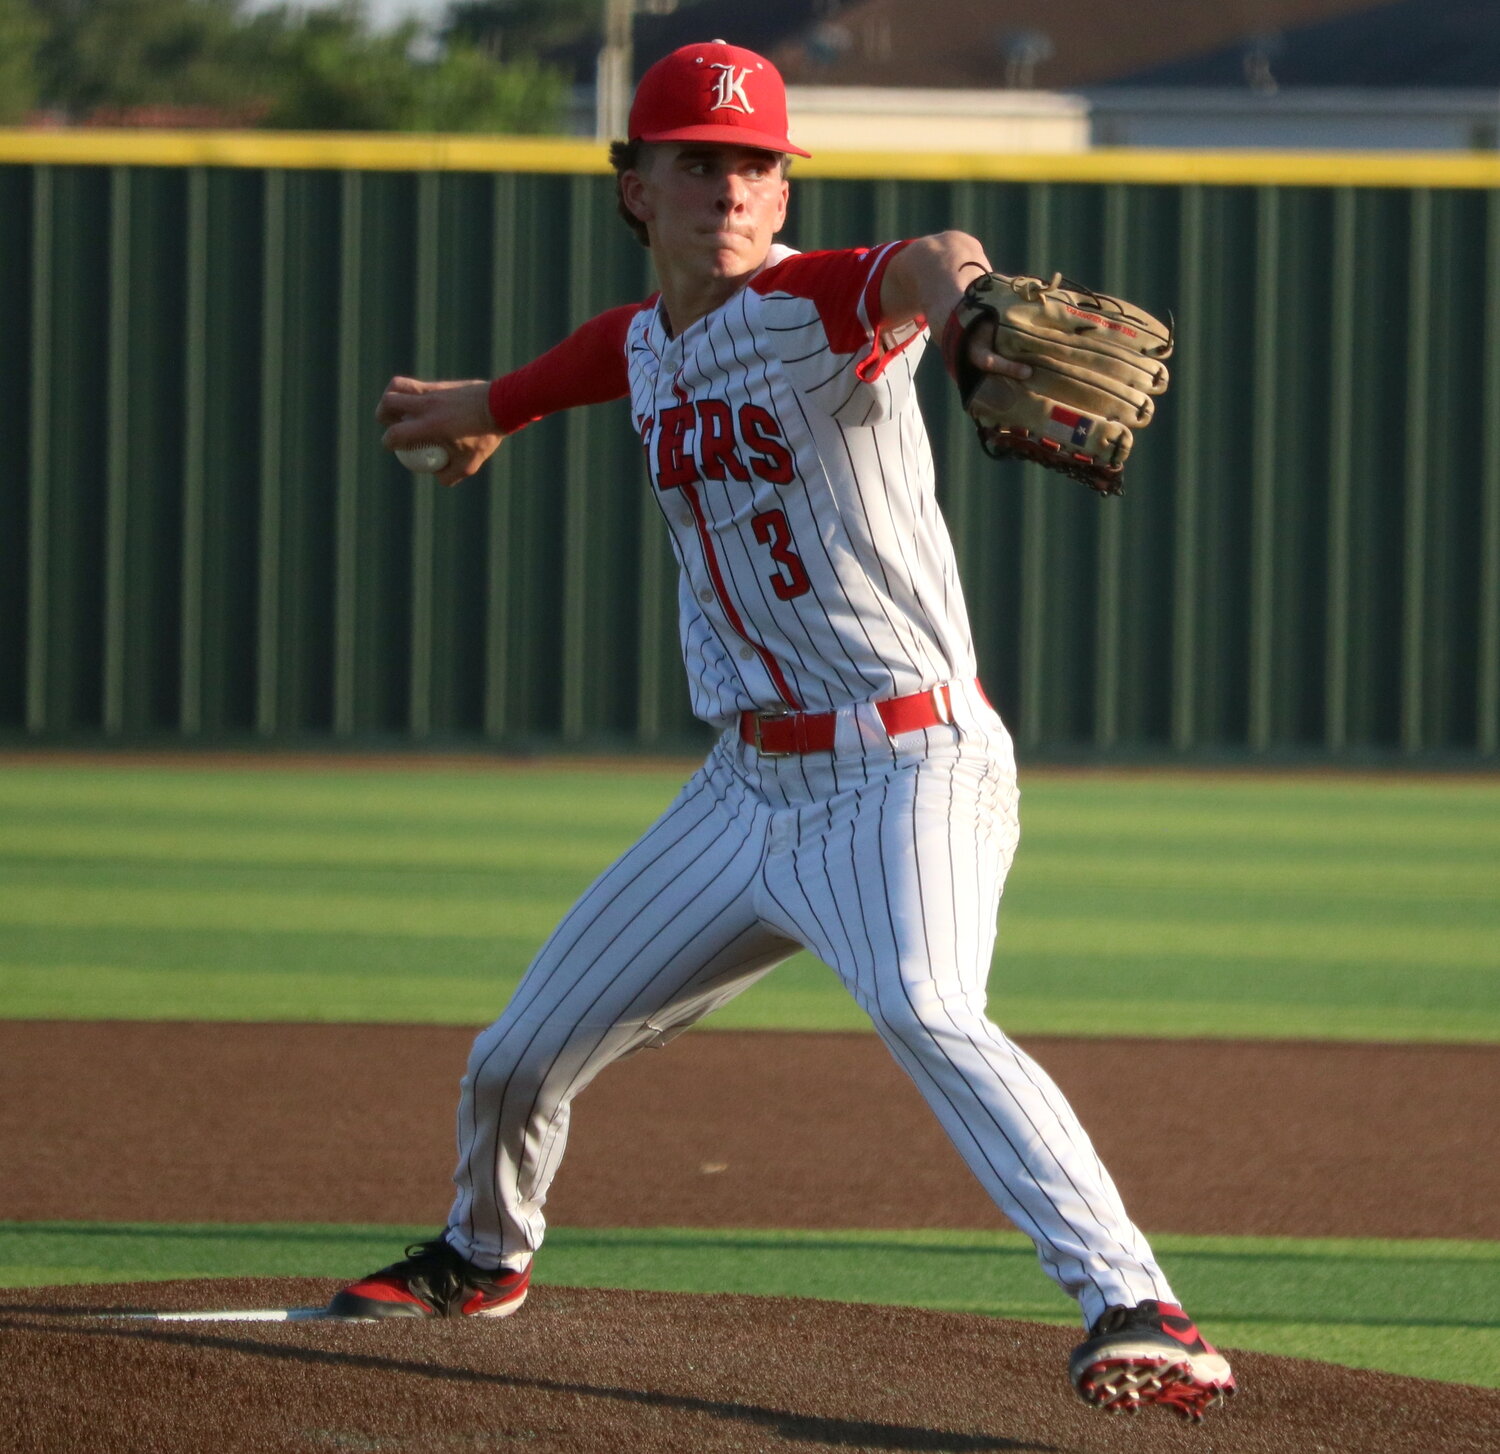 Caleb Koger pitches during Thursday's Regional Quarterfinal game between Katy and Tompkins at Cy-Springs.